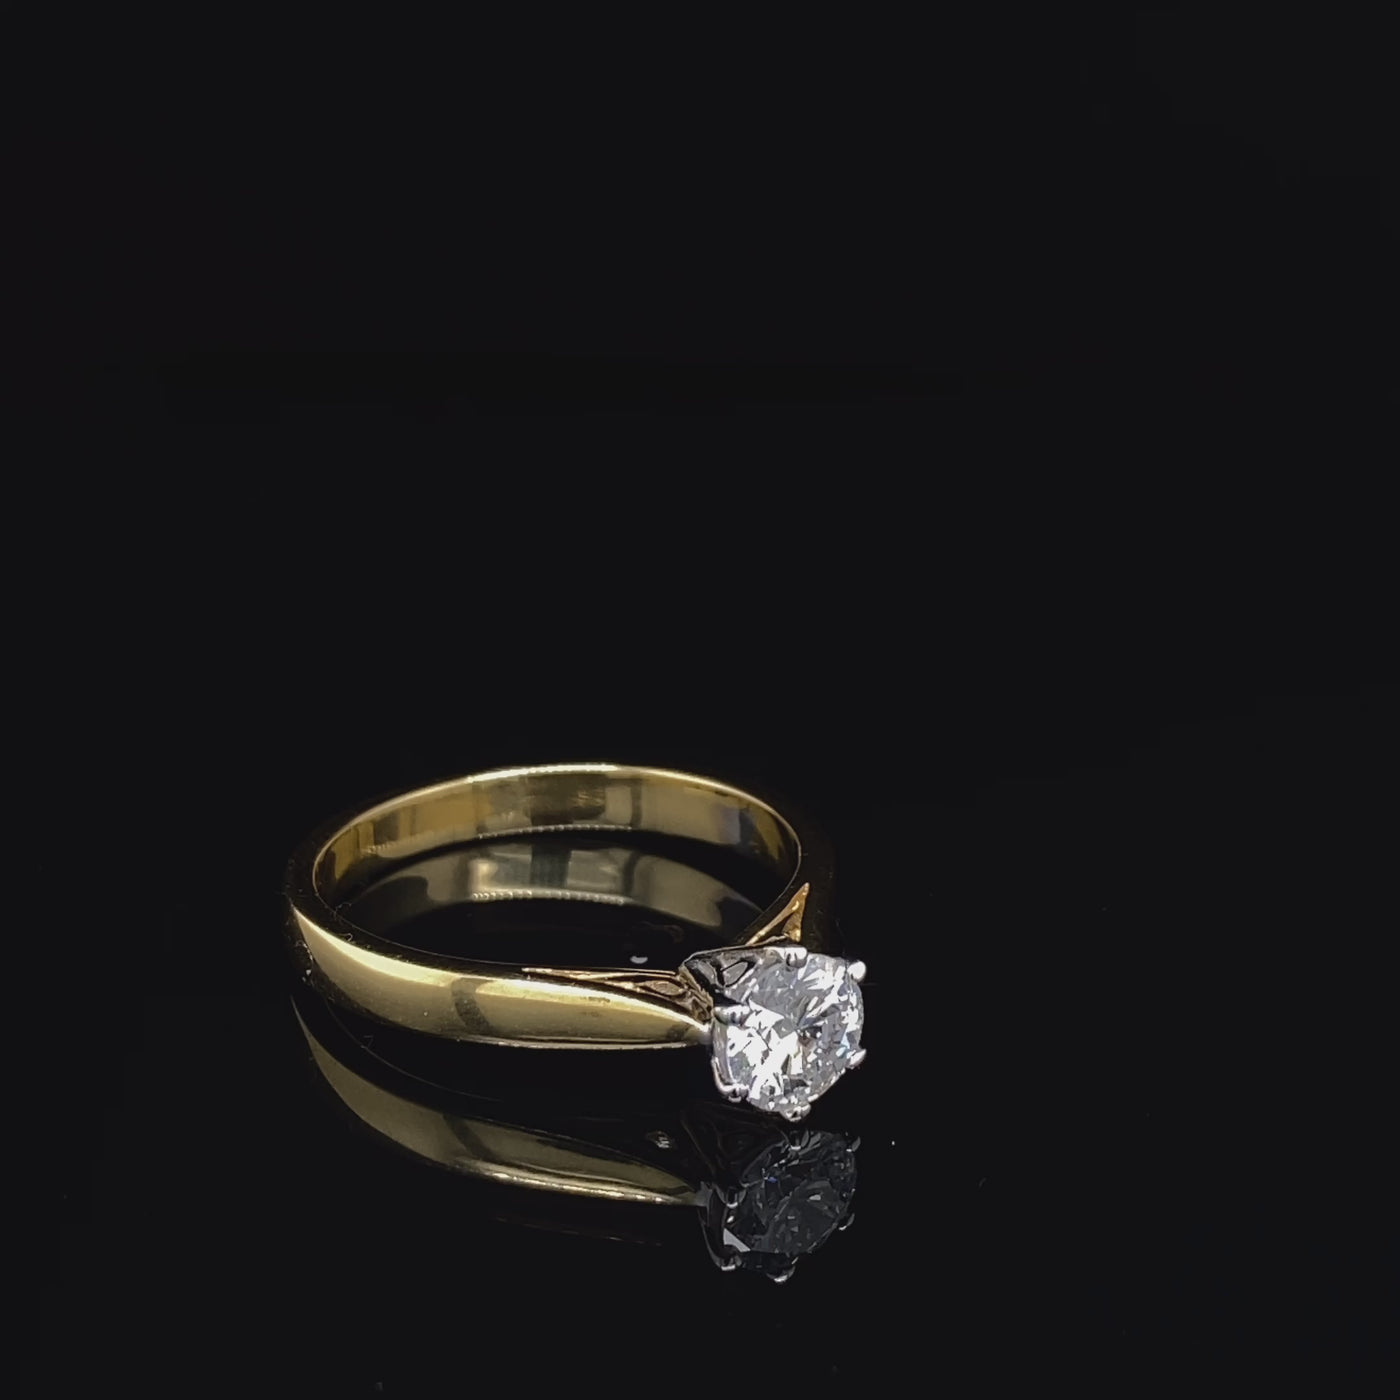 18ct 2 Tone 1/2 Carat Soltaire 6 Claw Engagement Ring